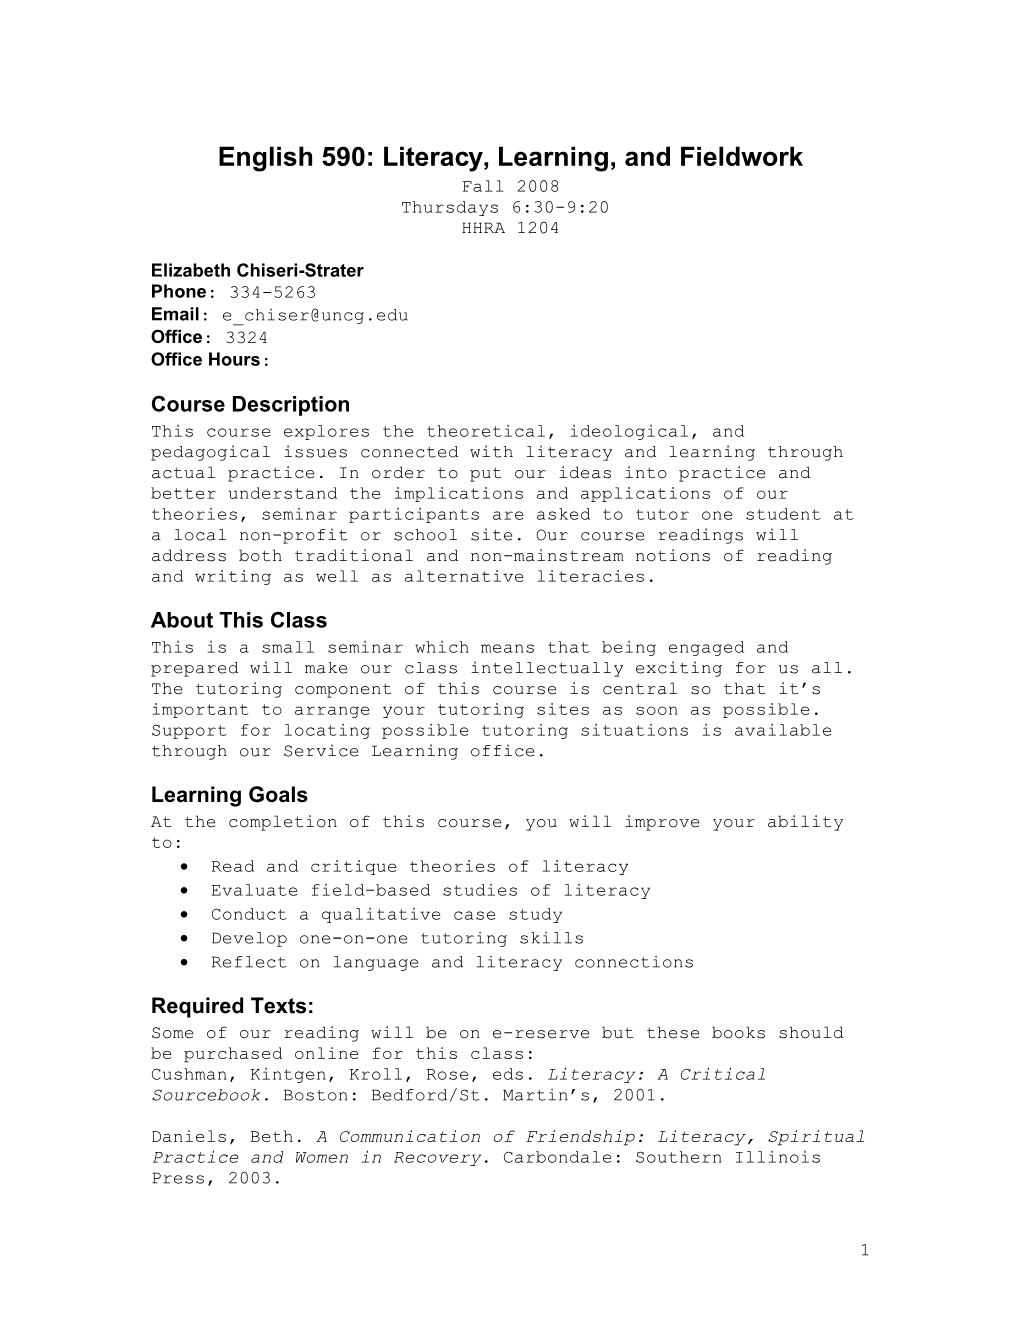 English 590:Literacy, Learning, and Fieldwork